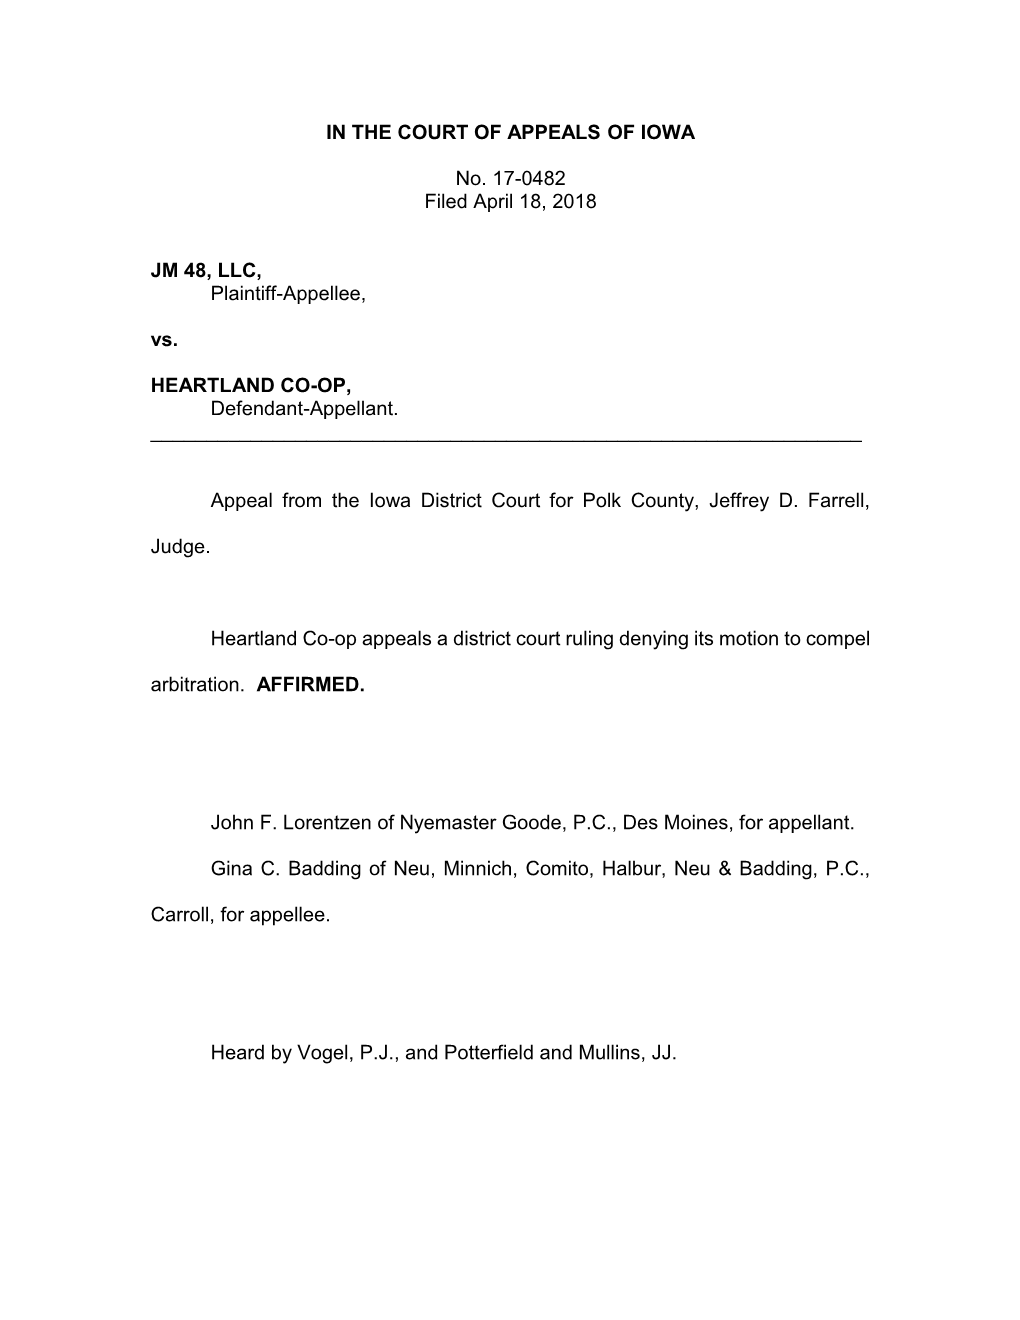 IN the COURT of APPEALS of IOWA No. 17-0482 Filed April 18